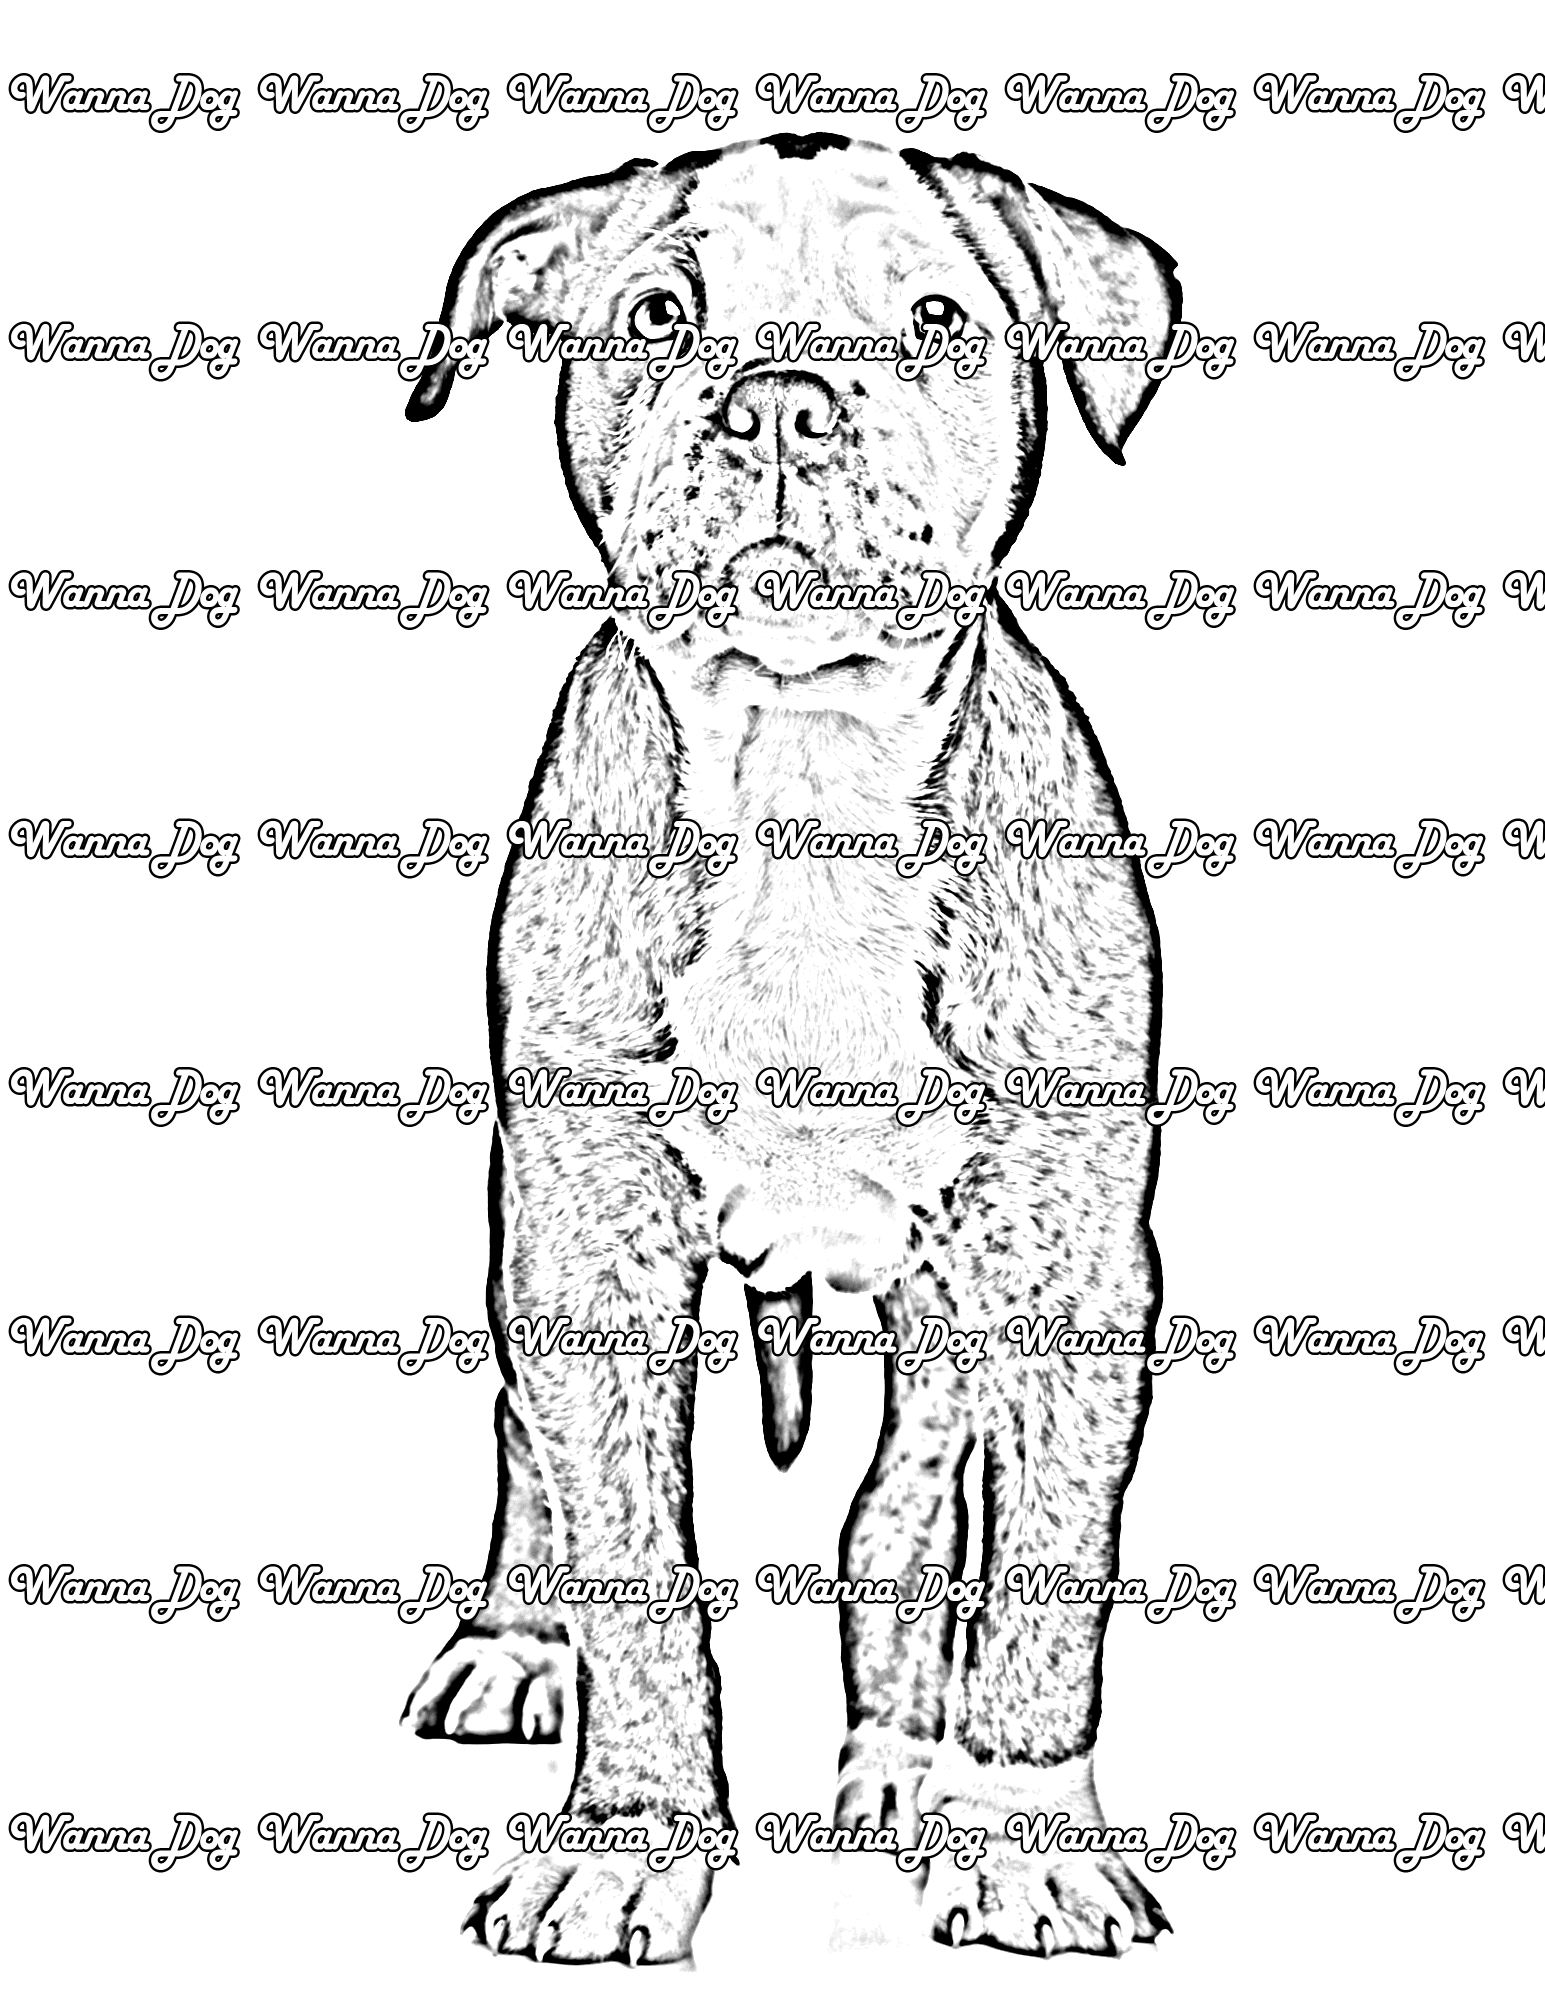 American Bulldog Coloring Page of a American Bulldog standing and looking up